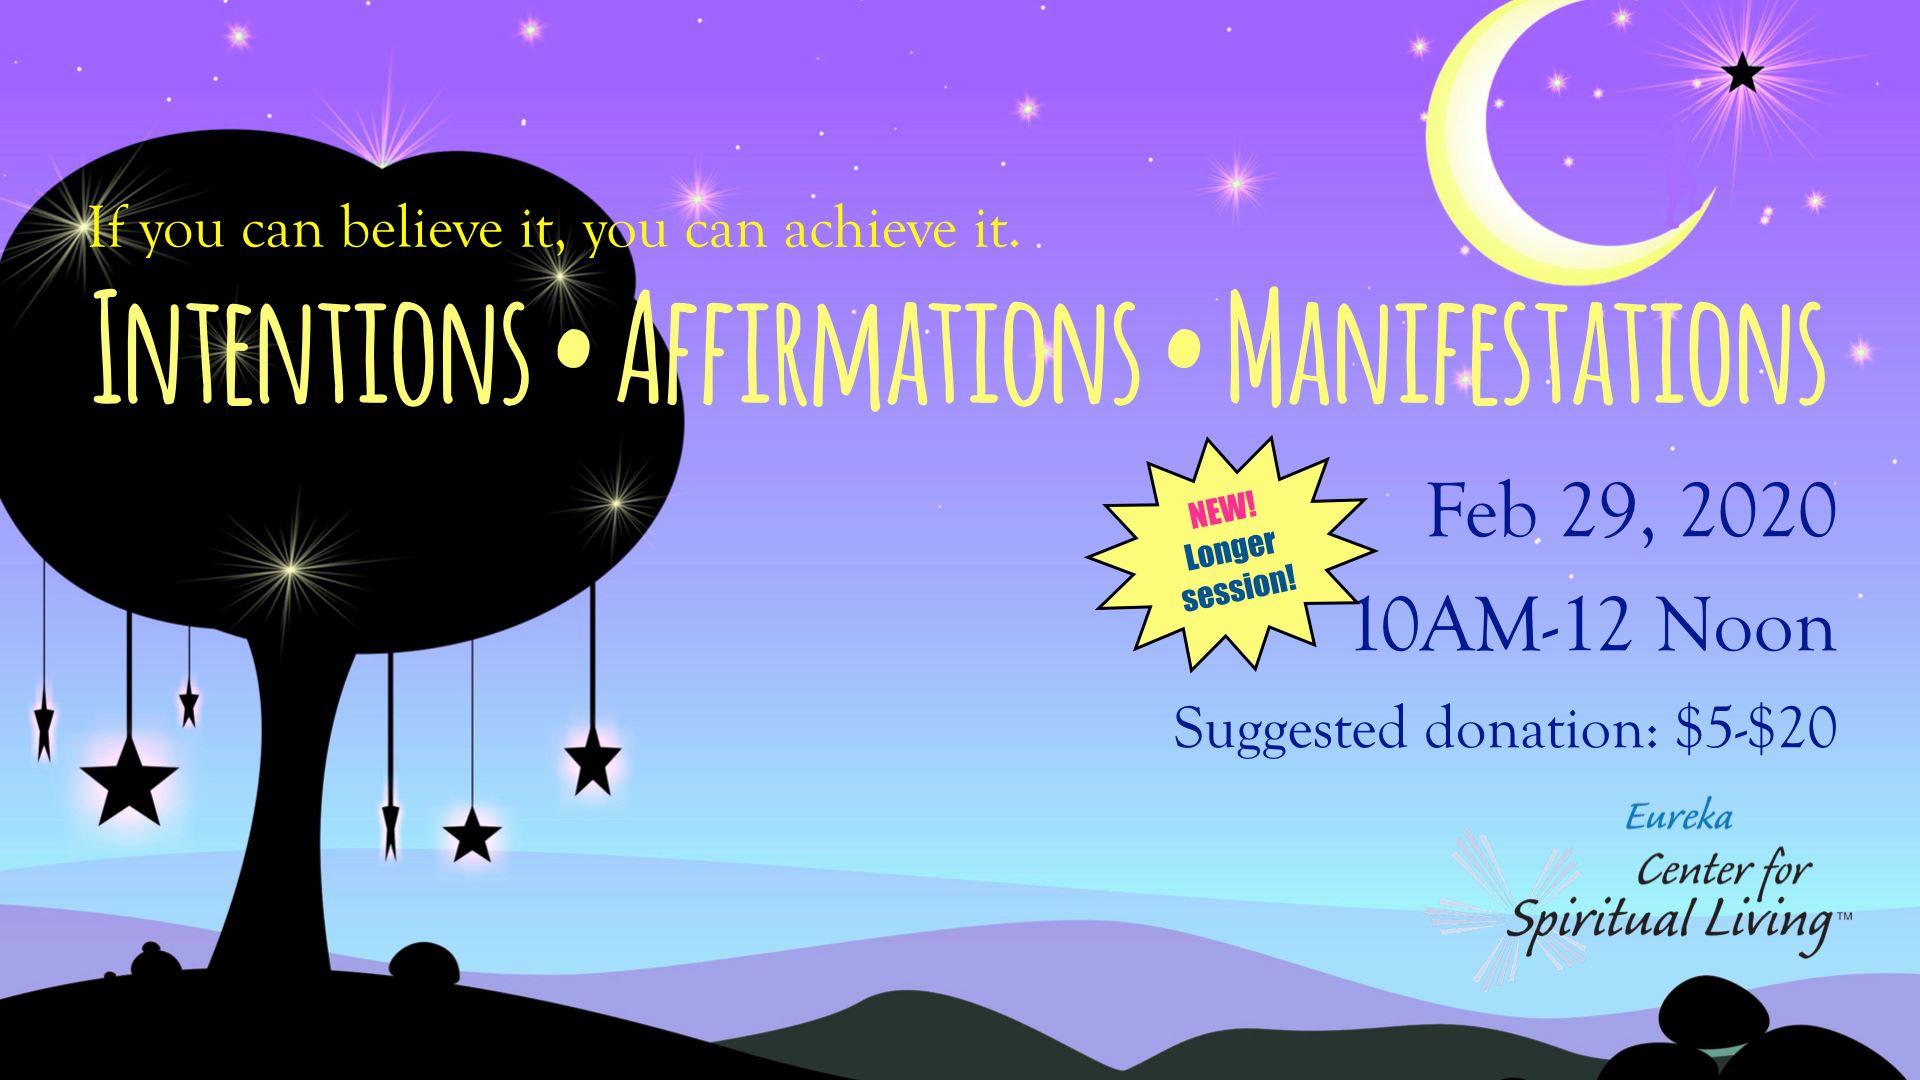 Intentions • Affirmations • Manifestions #2 on Feb 29